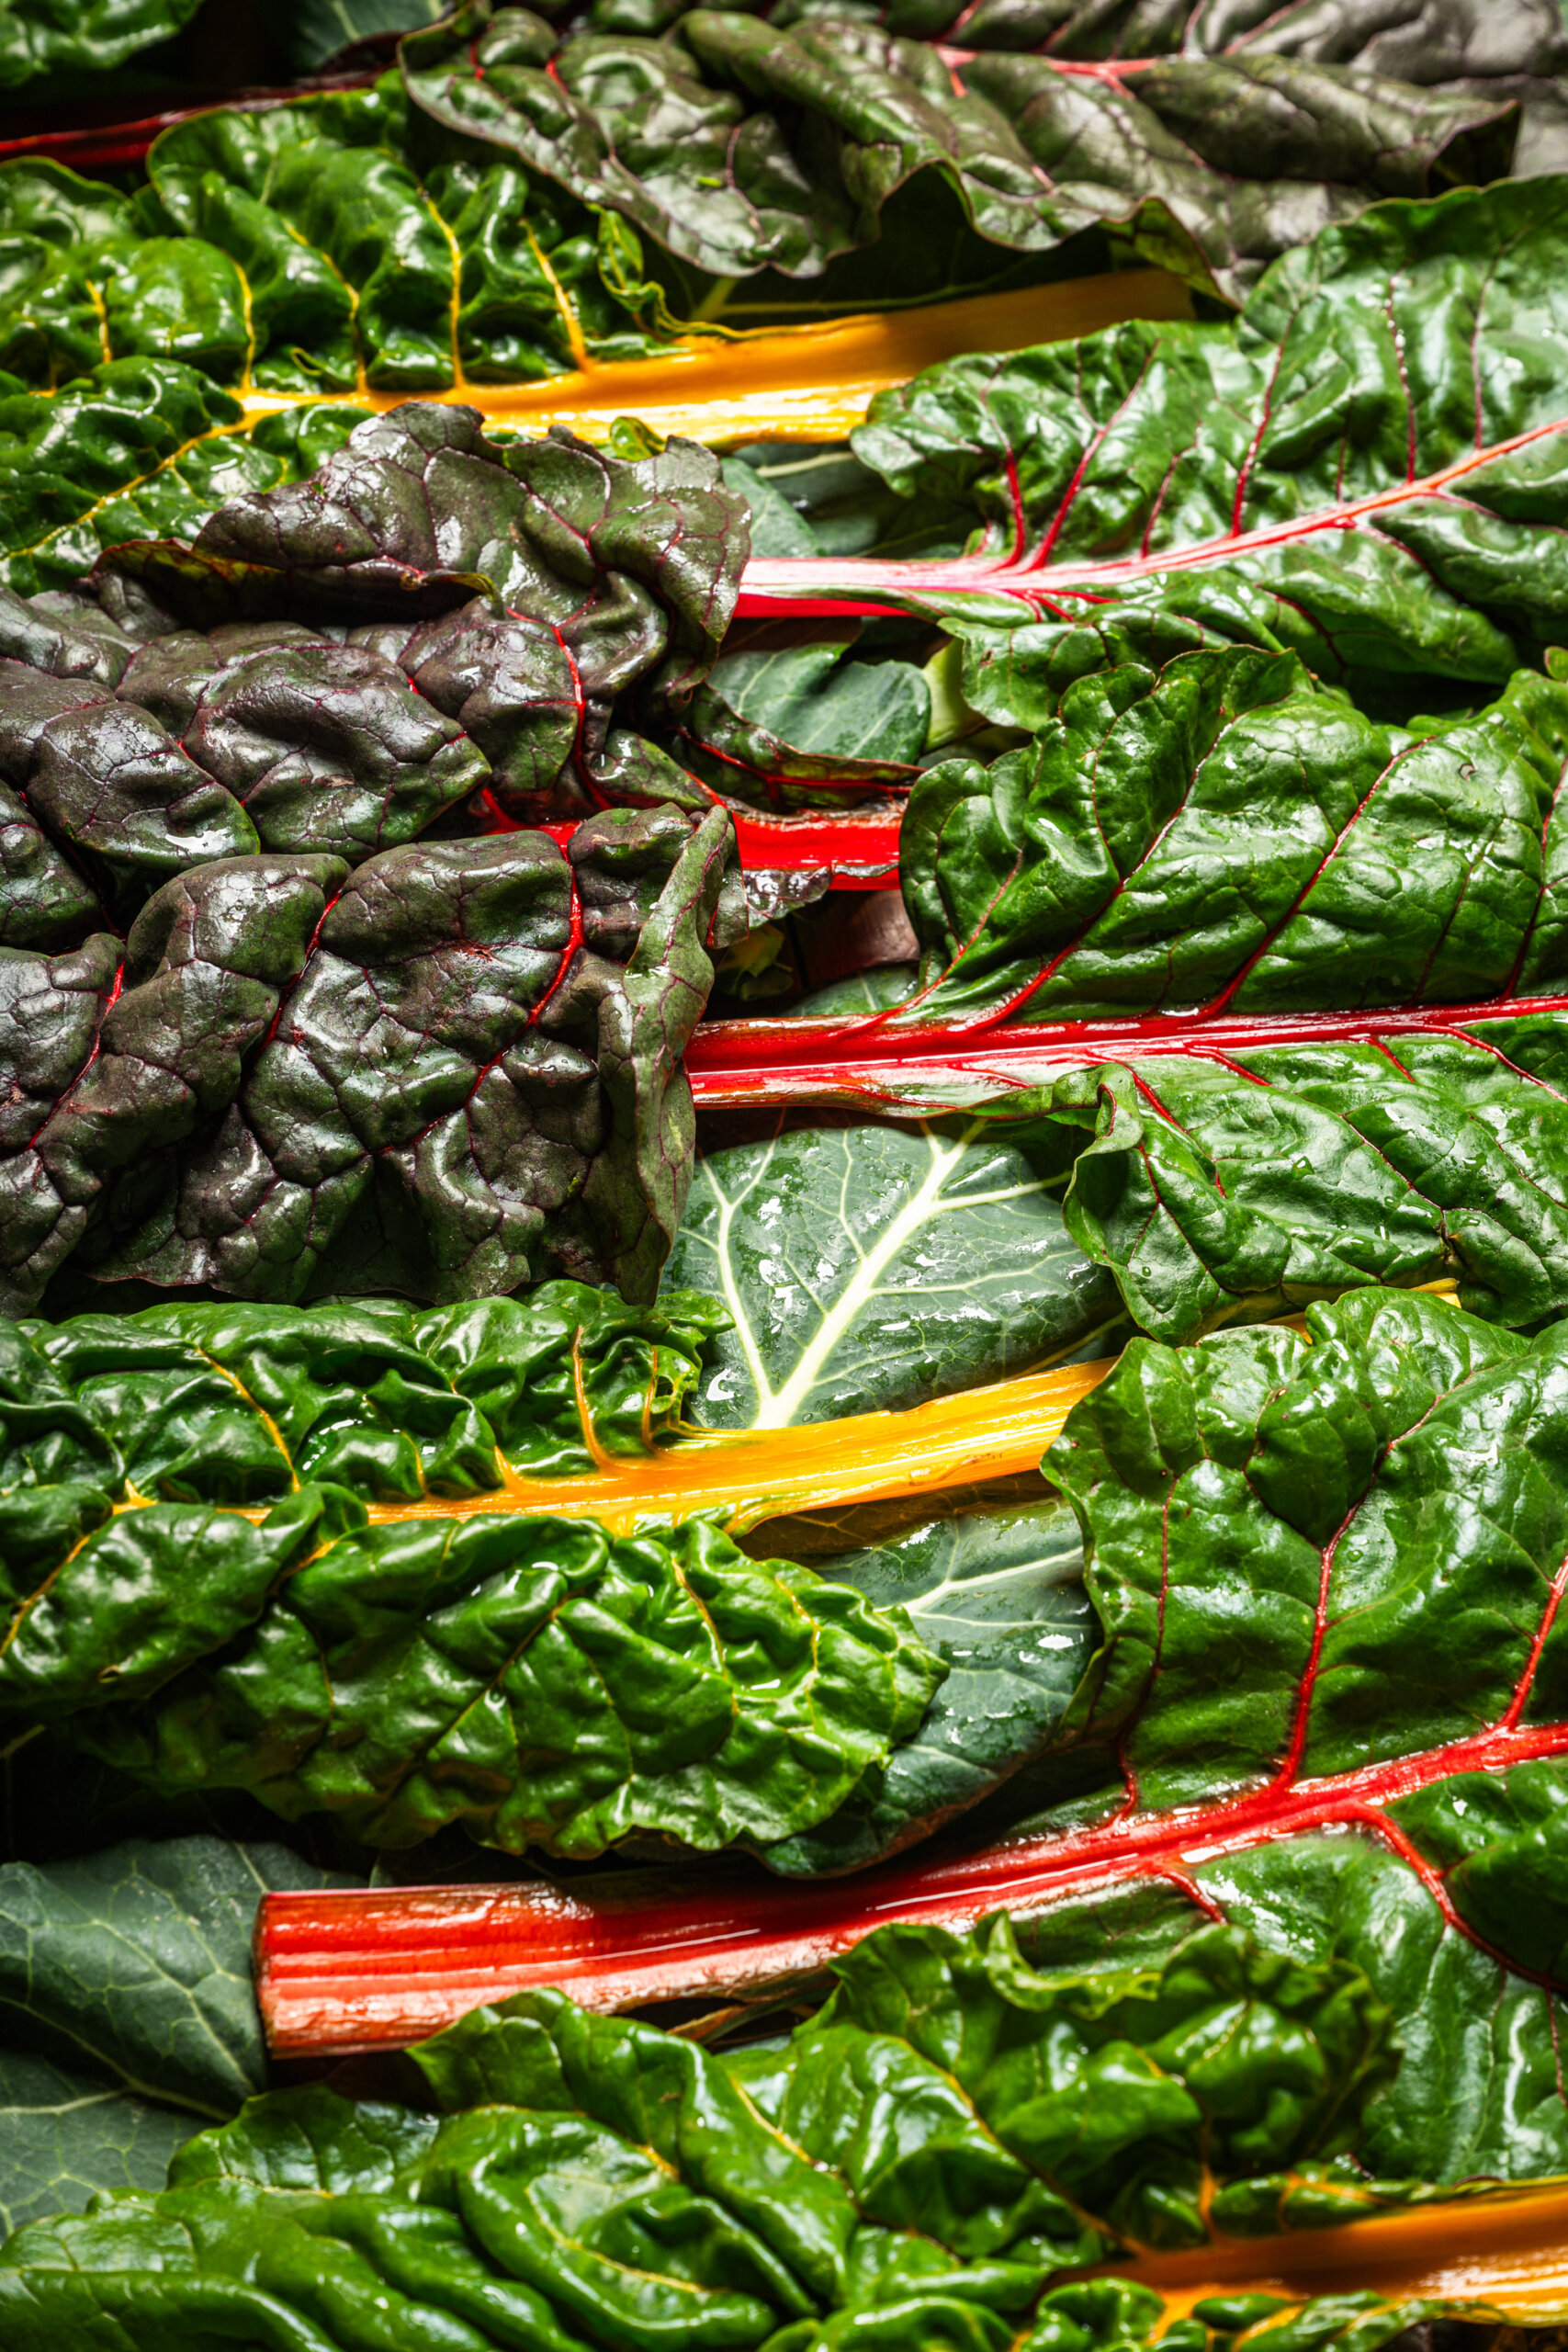 Colors and textures of rainbow chard and other leafy greens grown by Vessey Farms